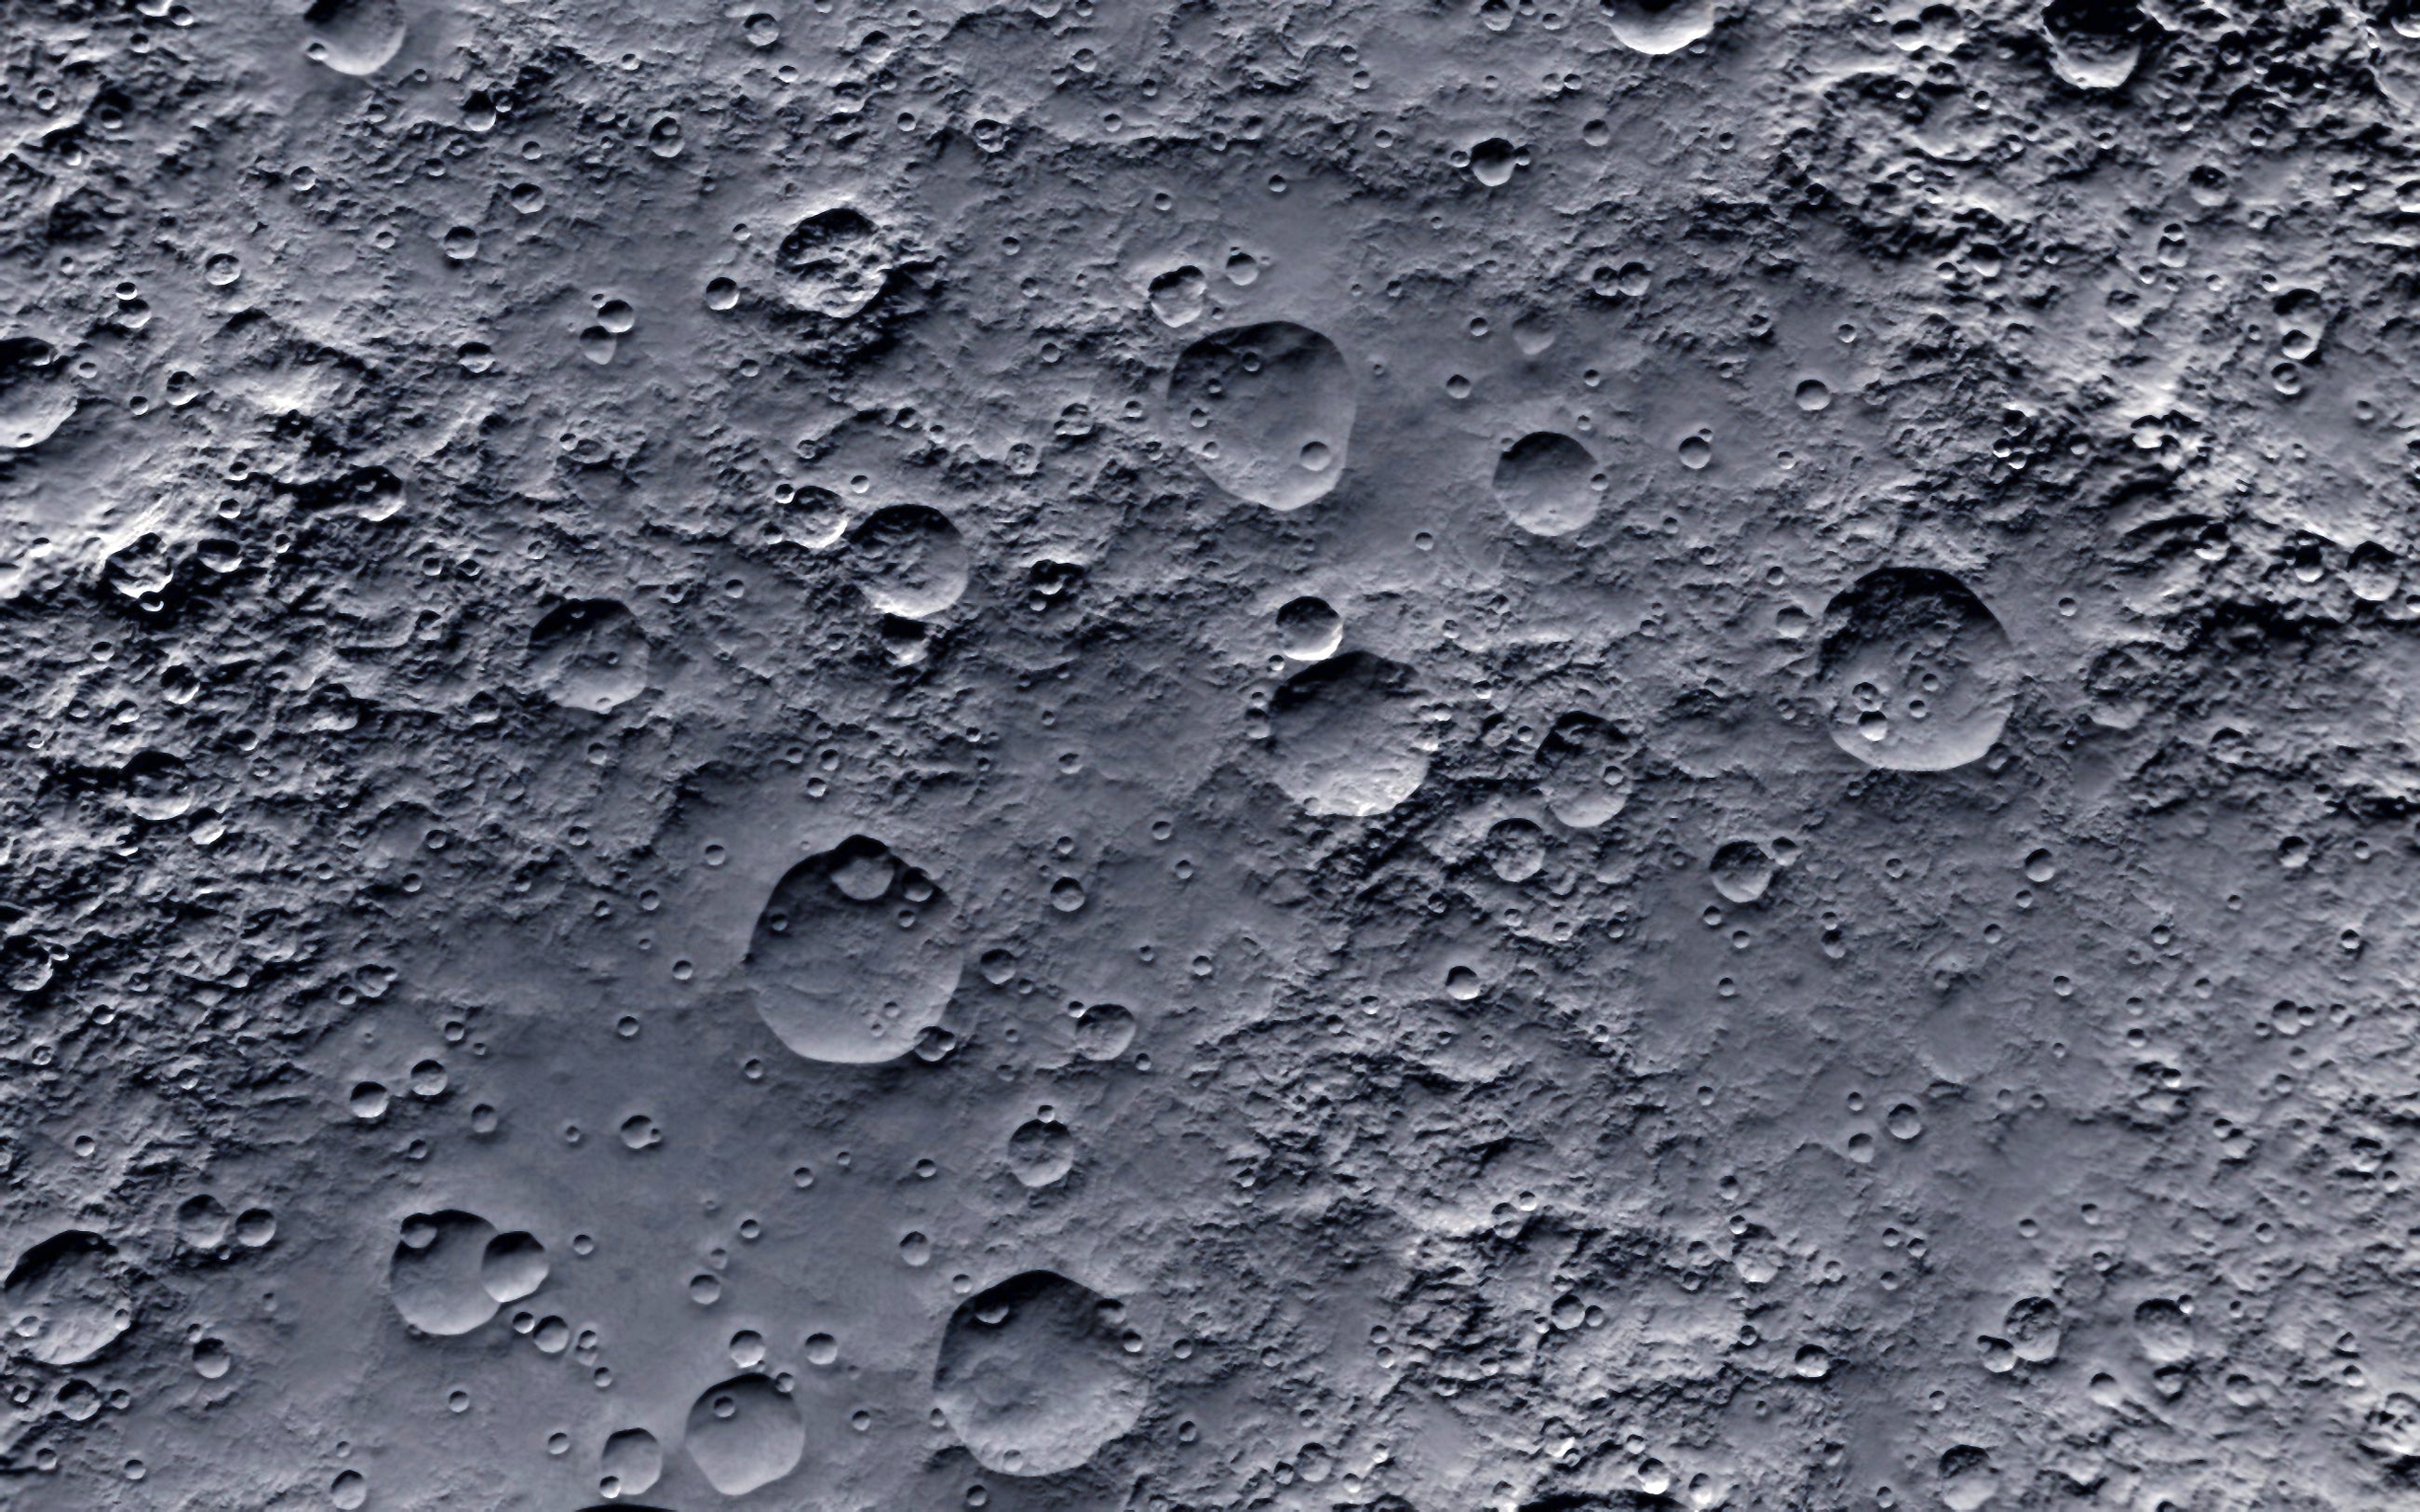 The moon’s surface – but what exactly lies beneath?